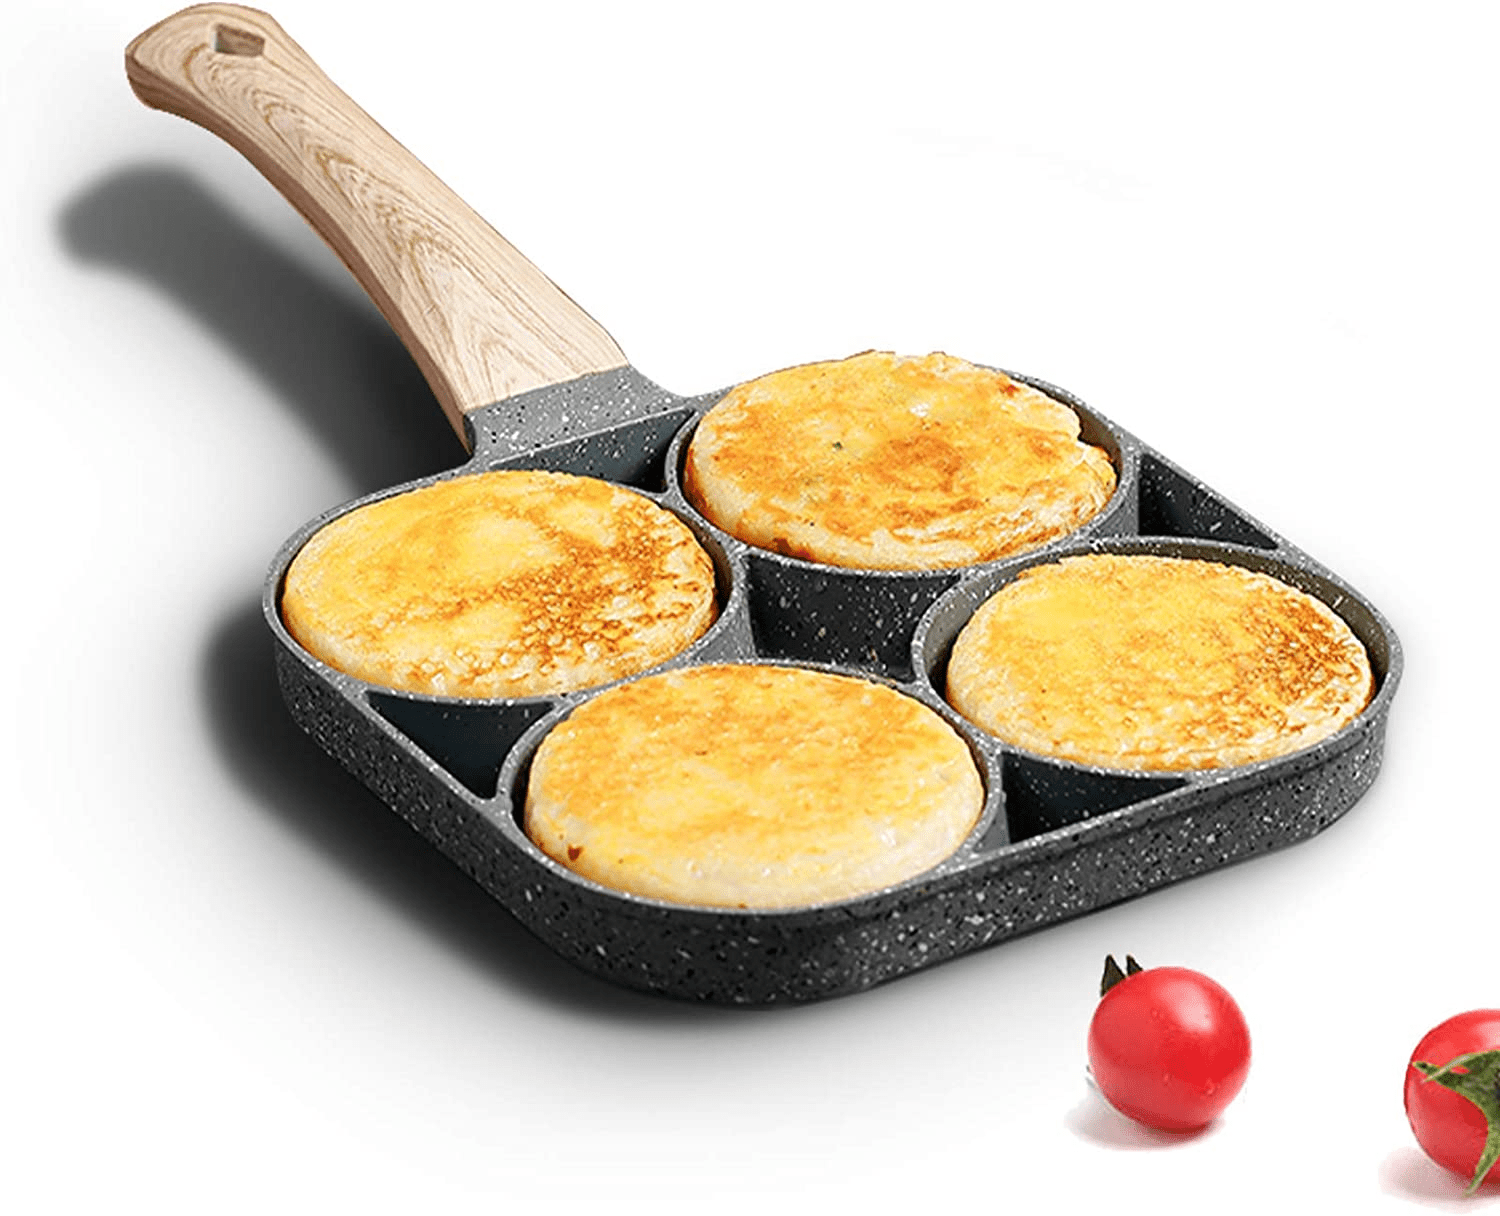 Pack Of 2 Mini Frying Pan, Mini Non-stick Pan, Fried Egg Pan, Egg Frying  Pan, Non-stick Omelet Pan With Insulating Protective Handle For Frying Eggs